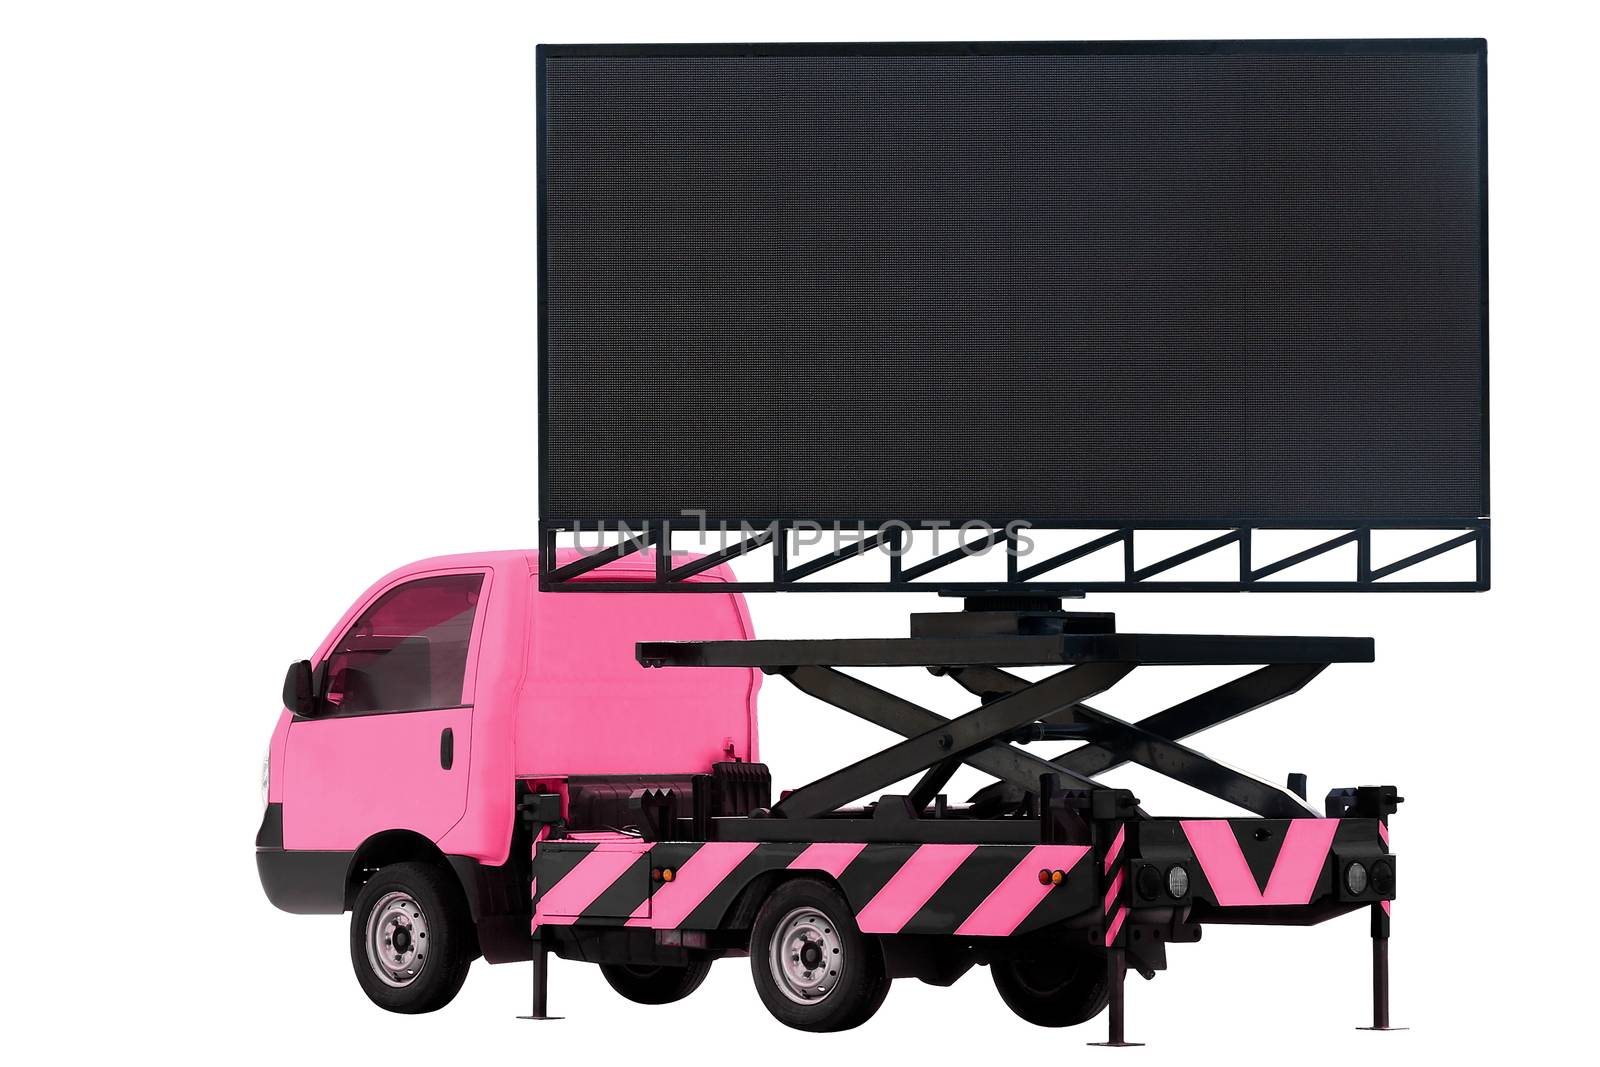 Billboard on car pink color LED panel for sign Advertising isolated on background white by cgdeaw